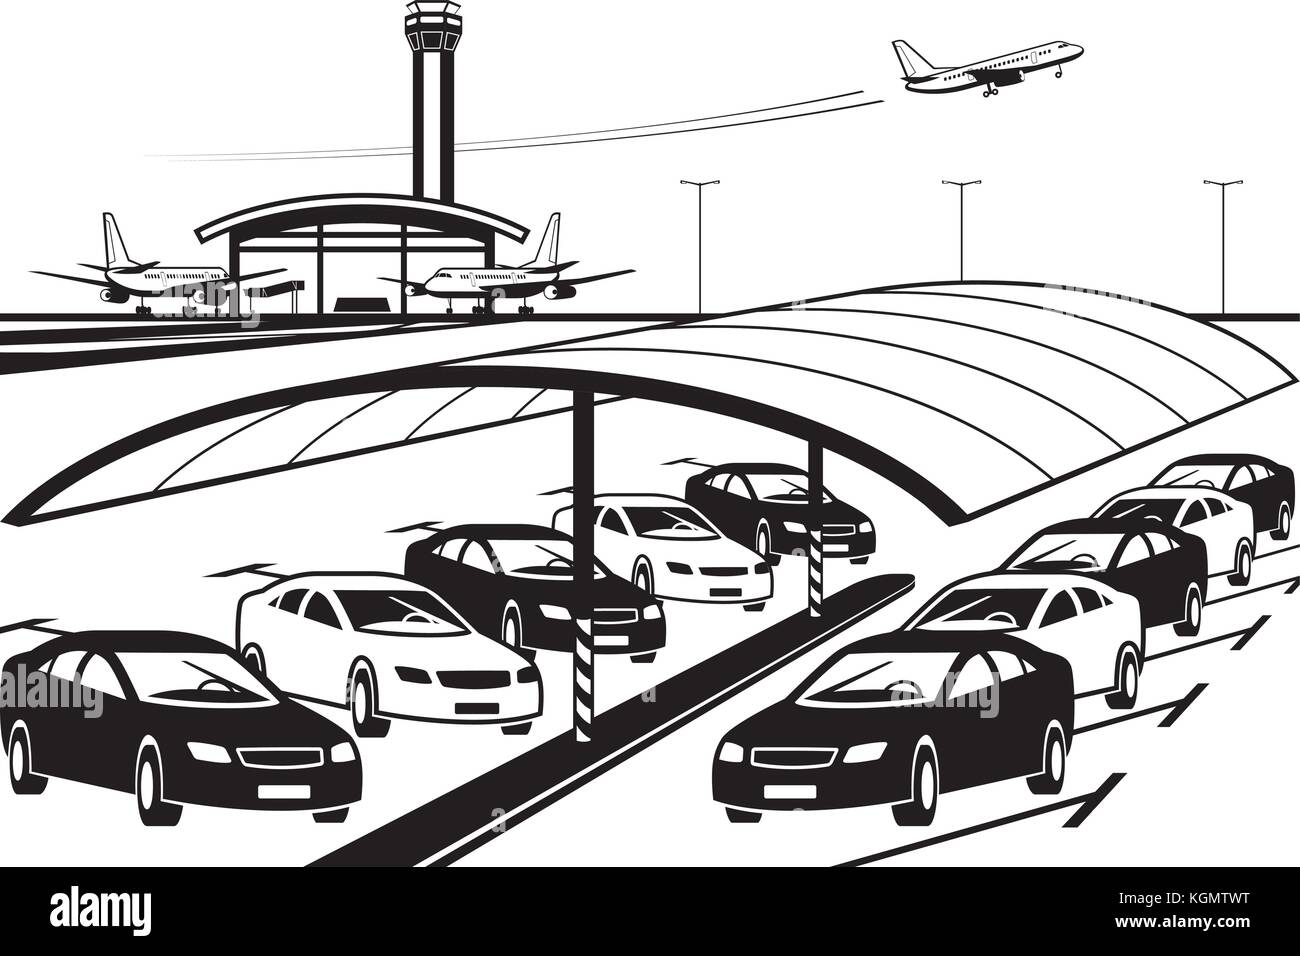 Covered parking at airport - vector illustration Stock Vector